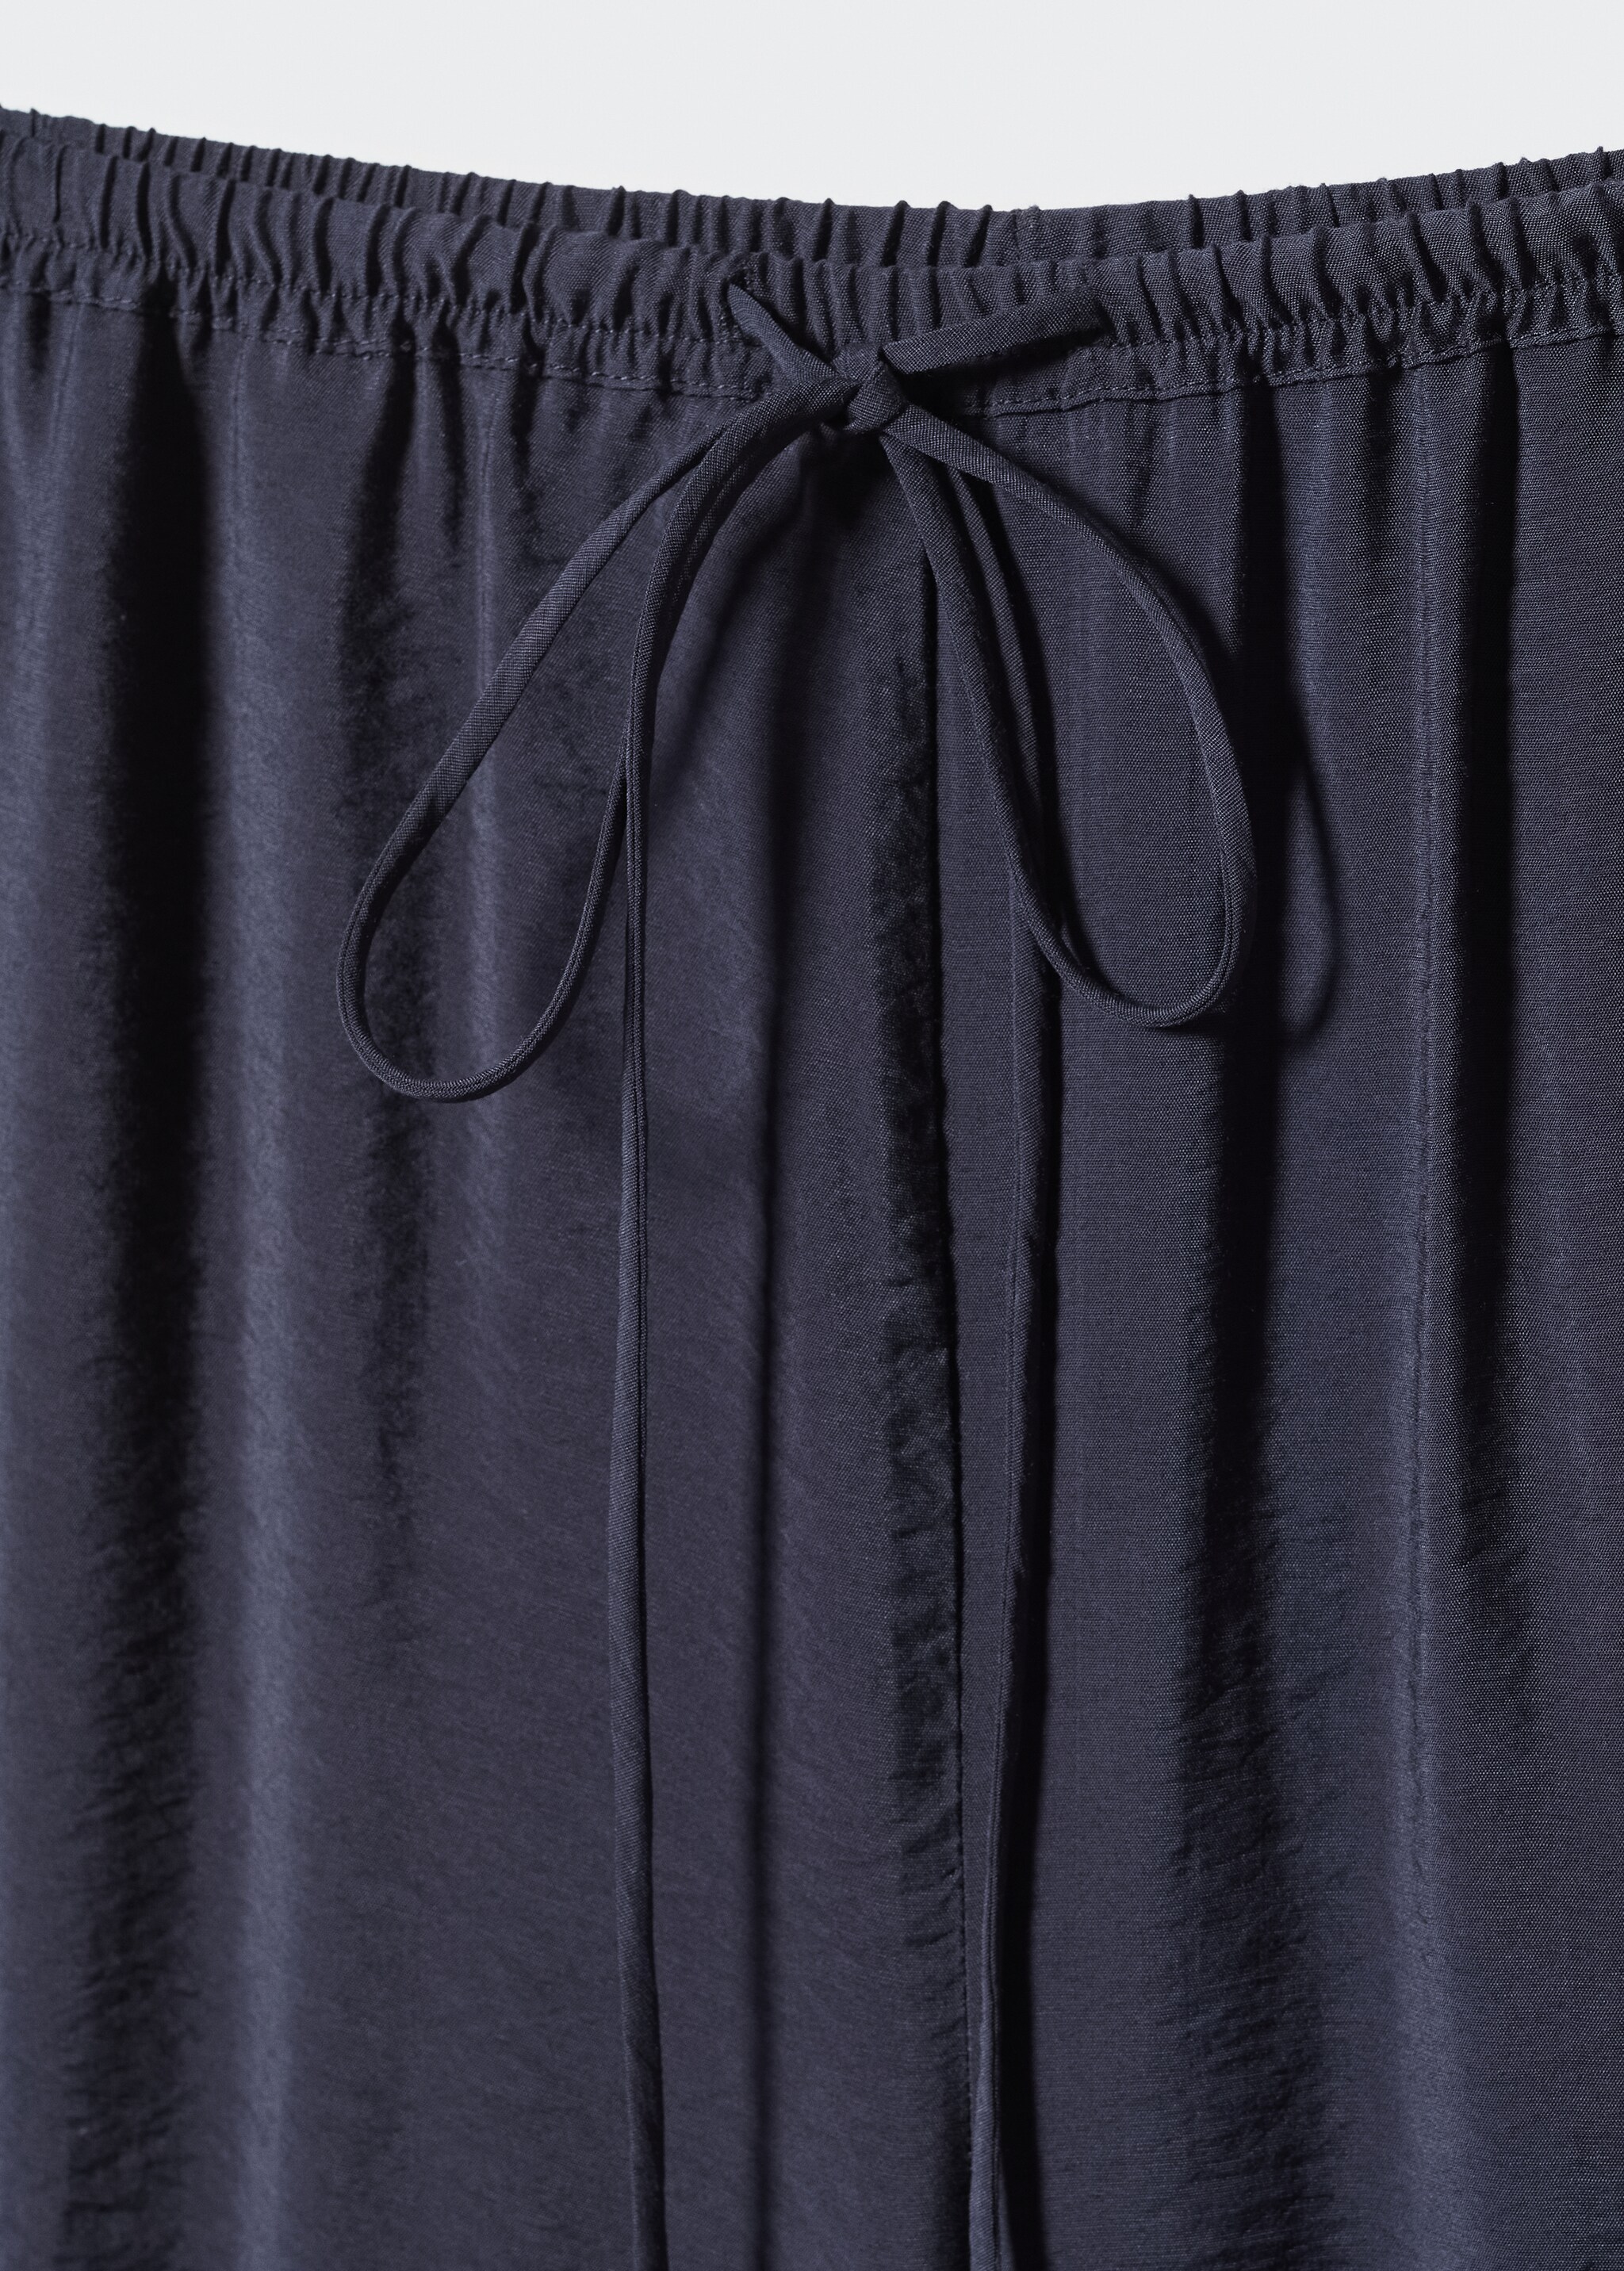 Satin palazzo pants - Details of the article 8